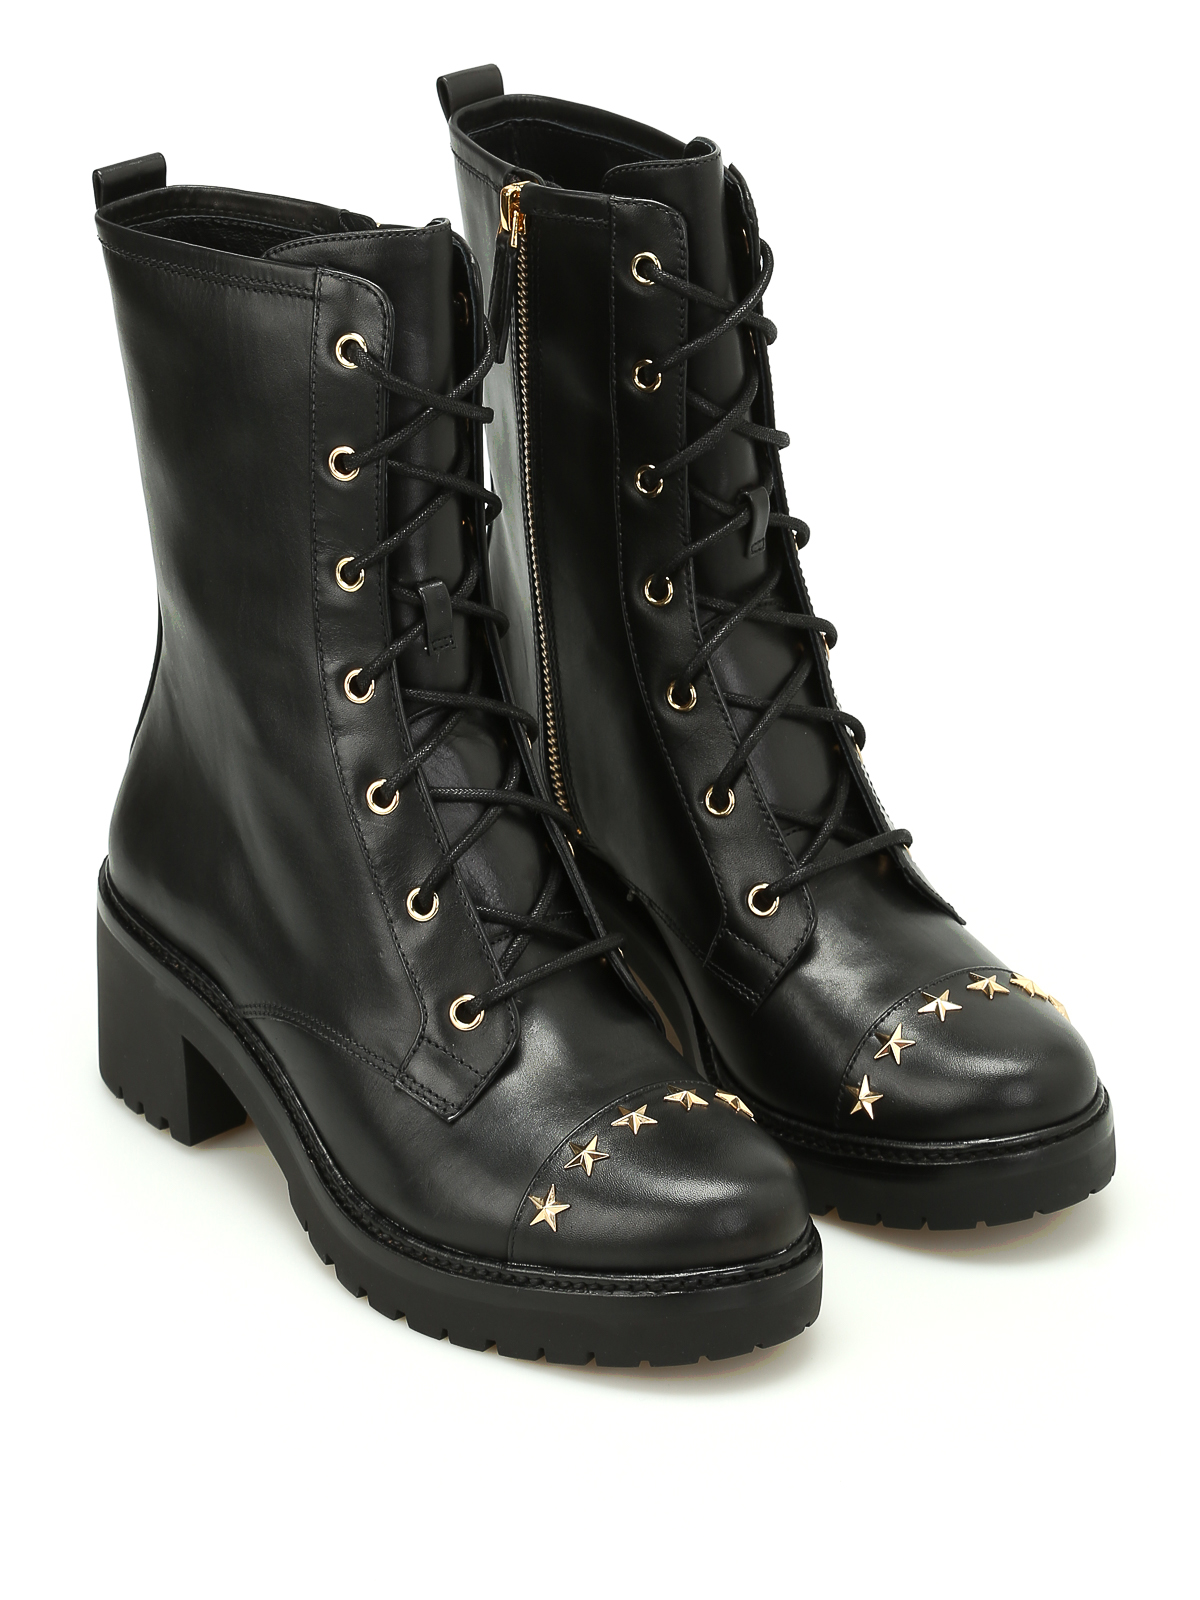 Cody military combat ankle boots 